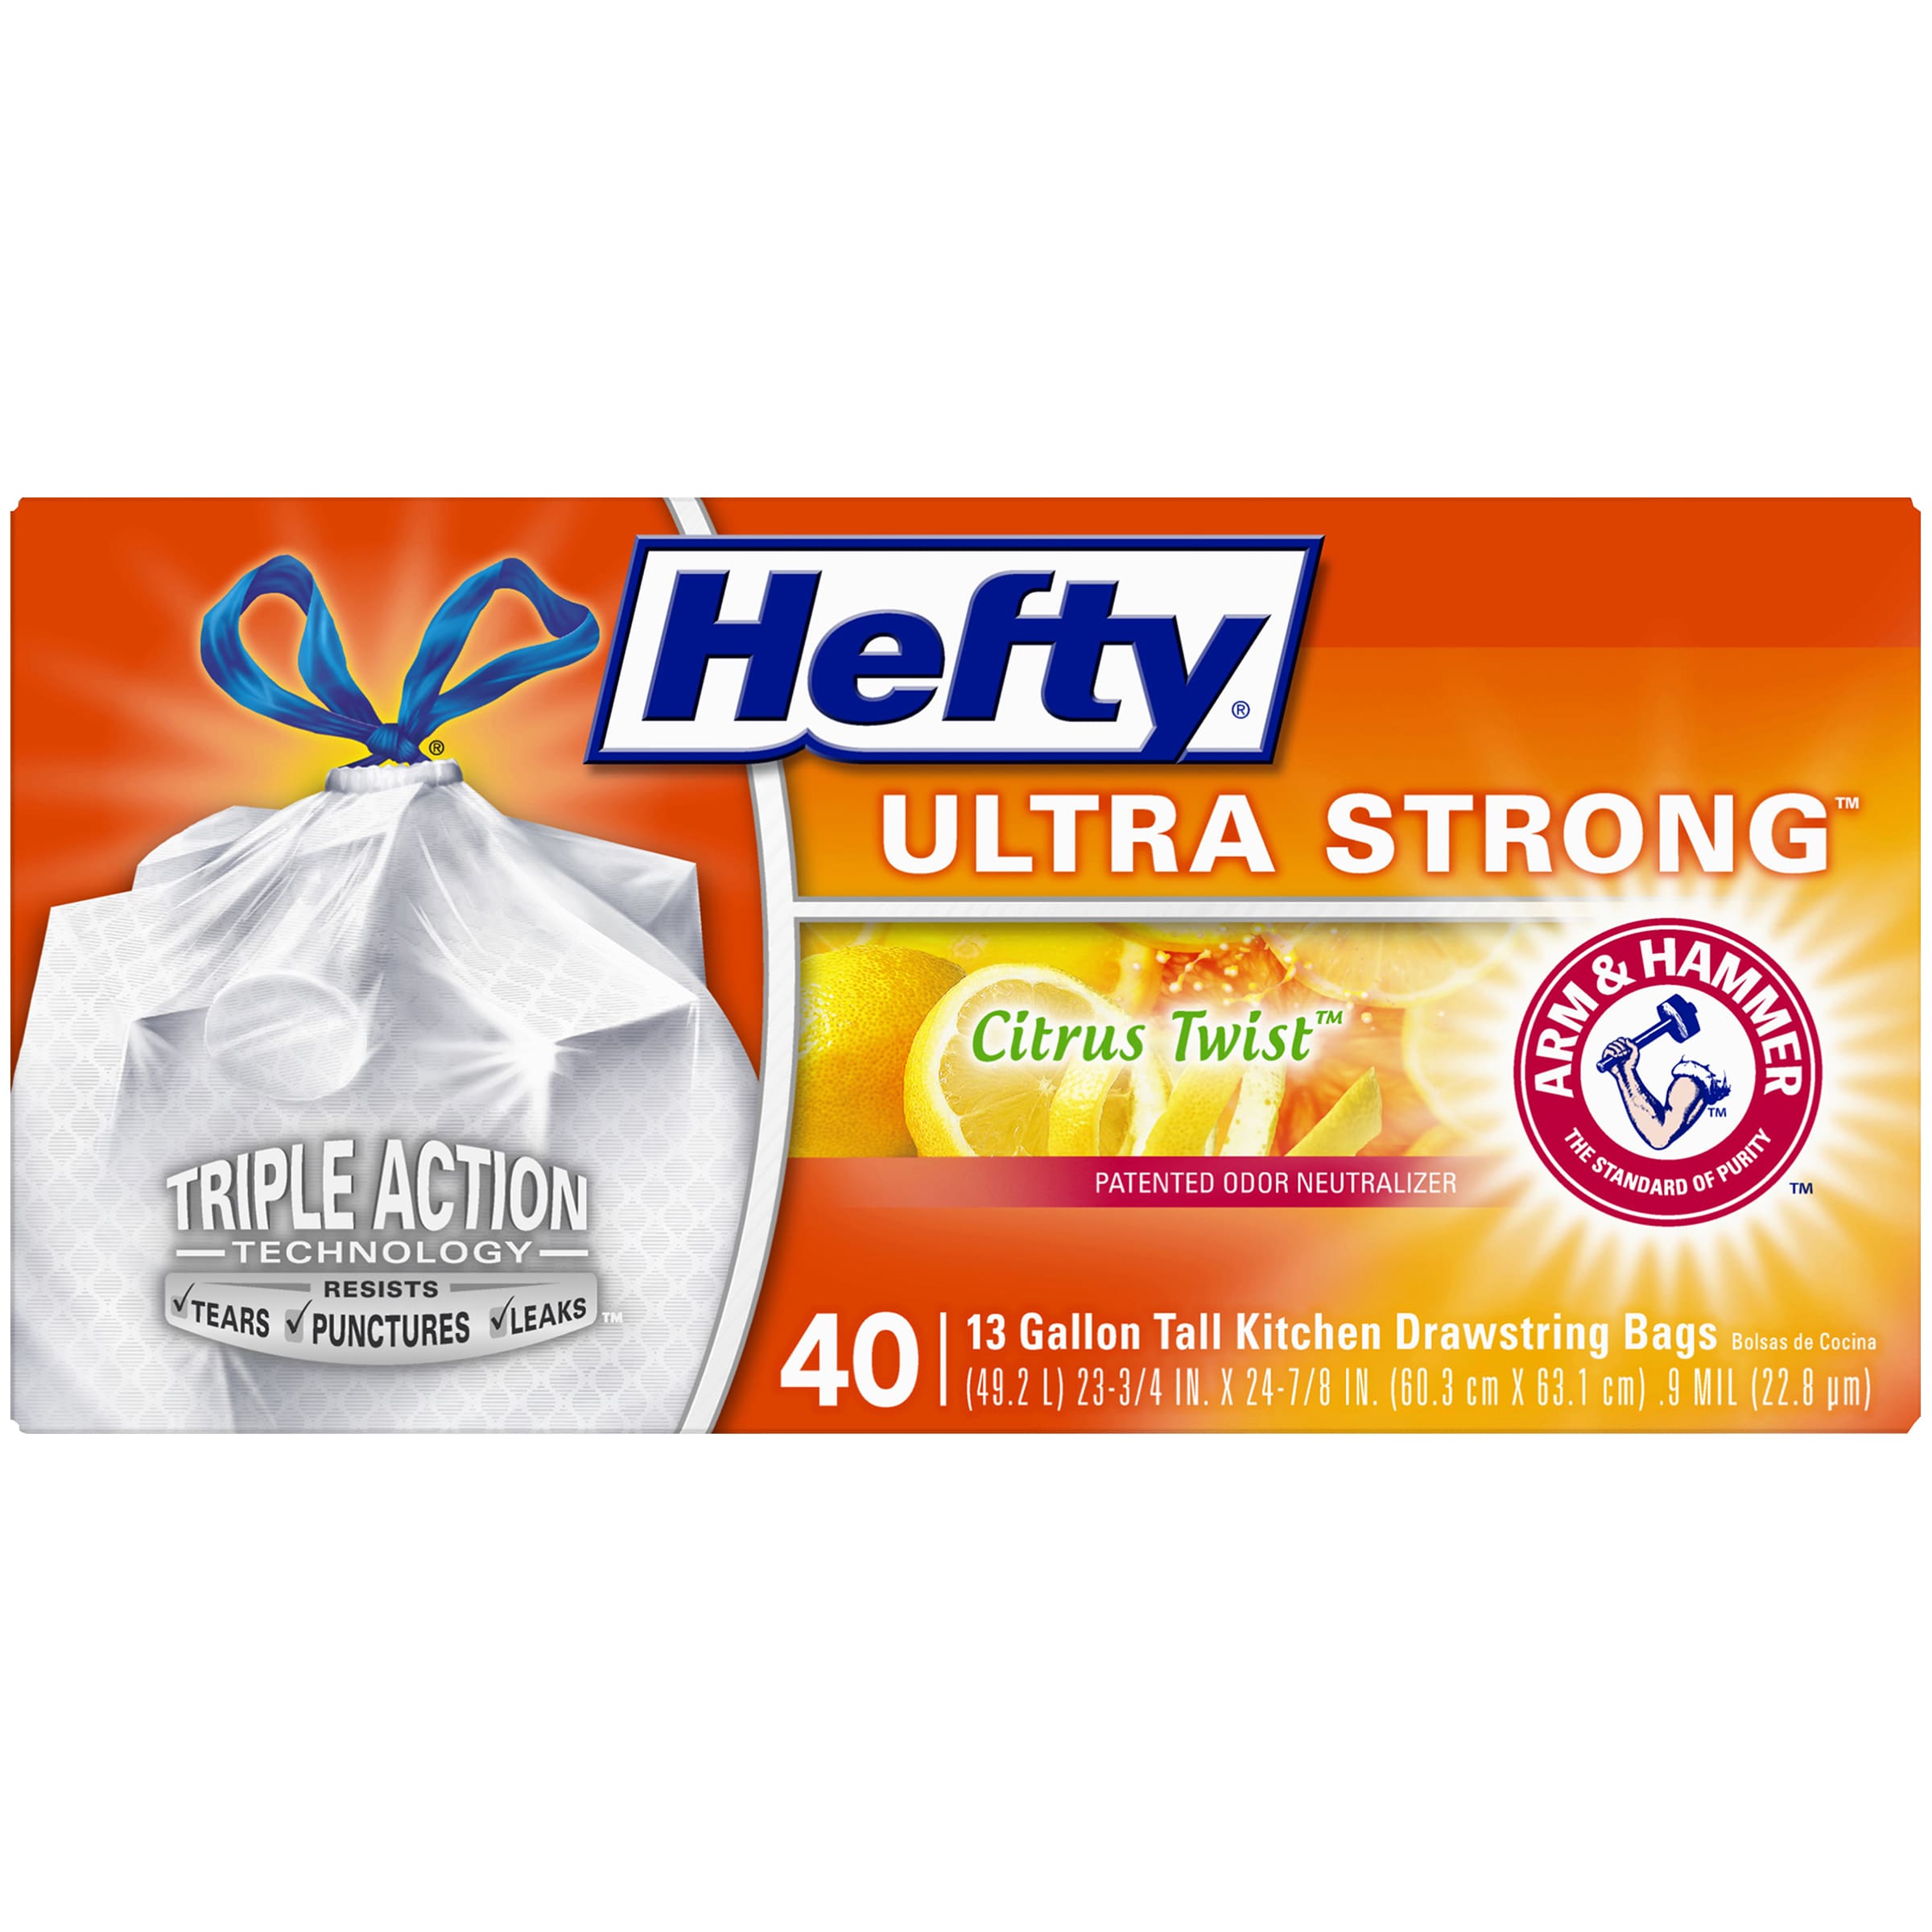 E48240 Hefty Renew Tall Kitchen Trash Bags, Unscented, 13 Gallon, 40 Count